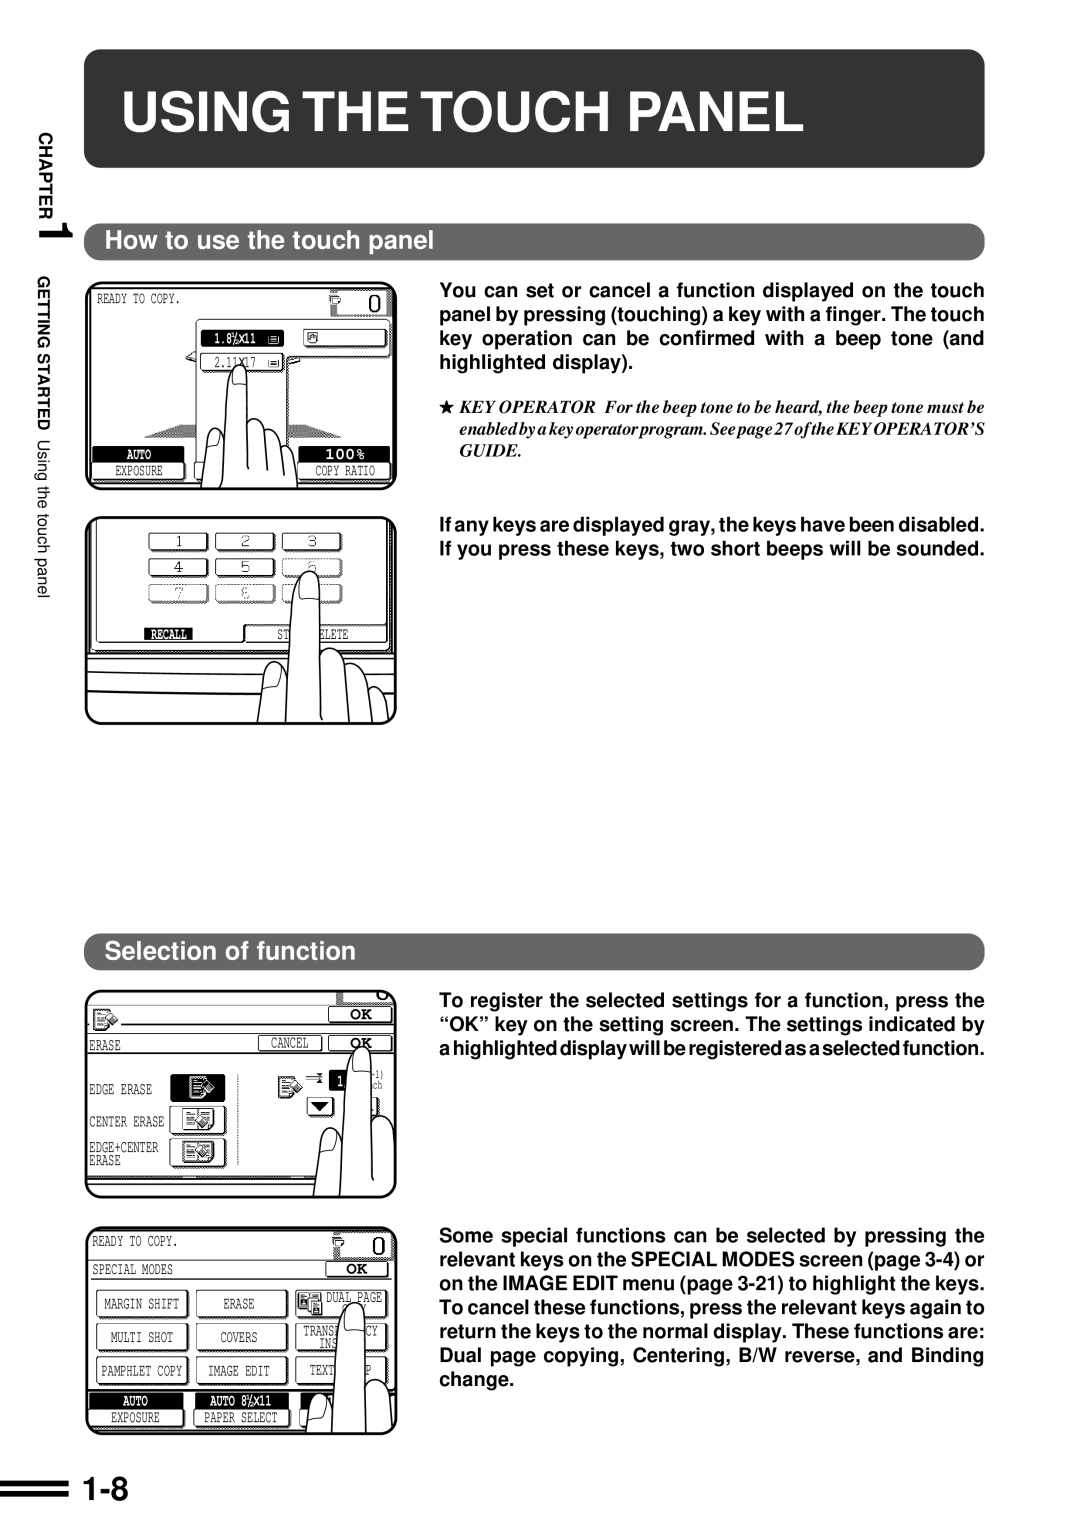 Sharp AR-287 manual Using The Touch Panel, How to use the touch panel, Selection of function 